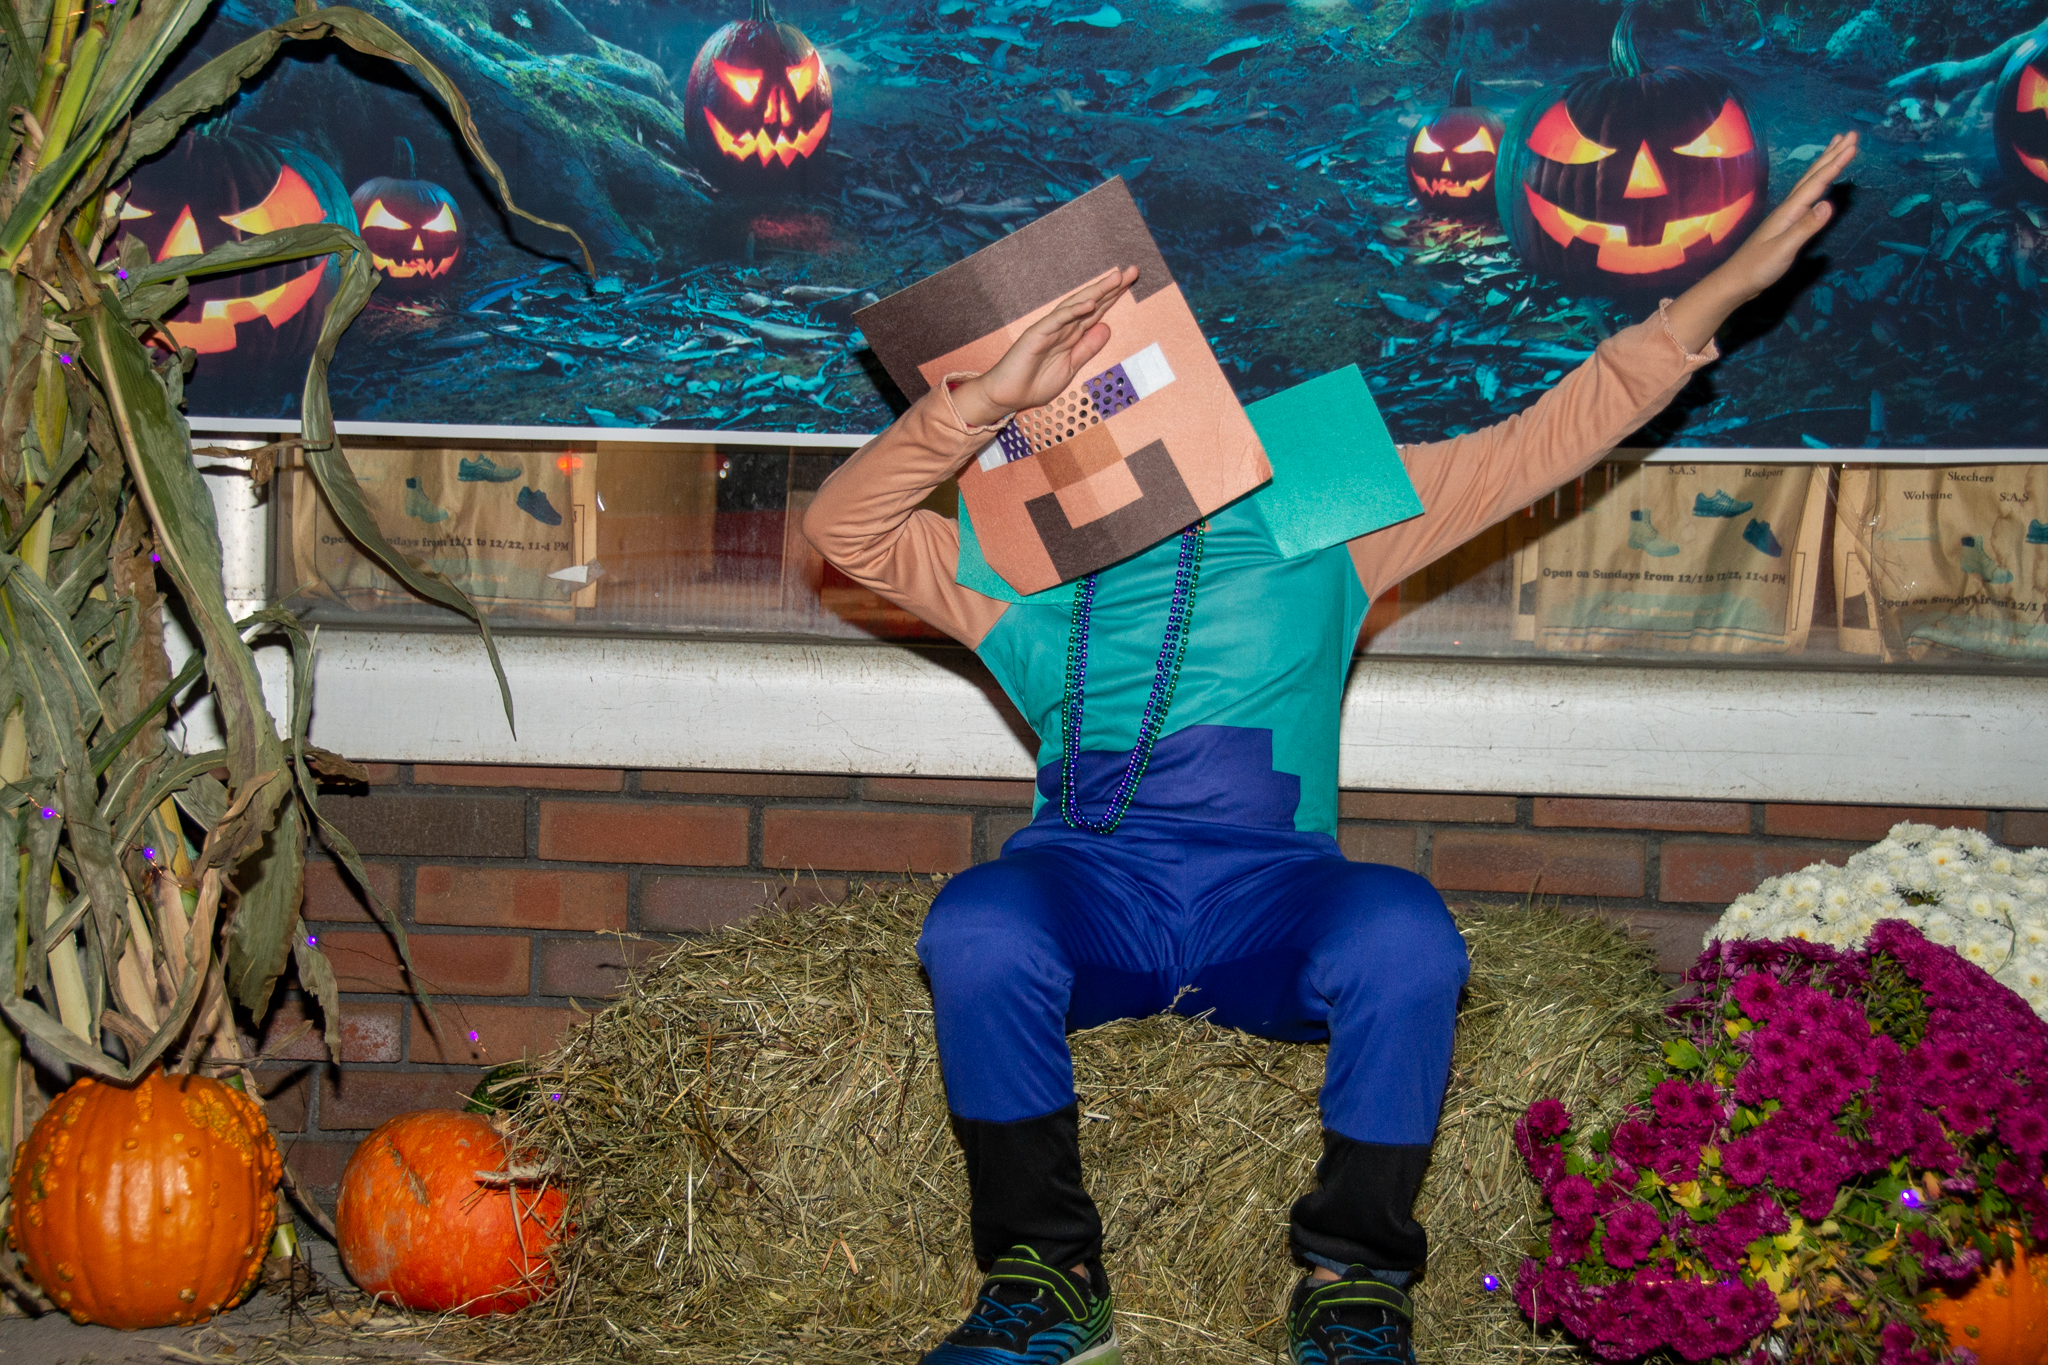 KID #7) Steve from Minecraft, Age 8